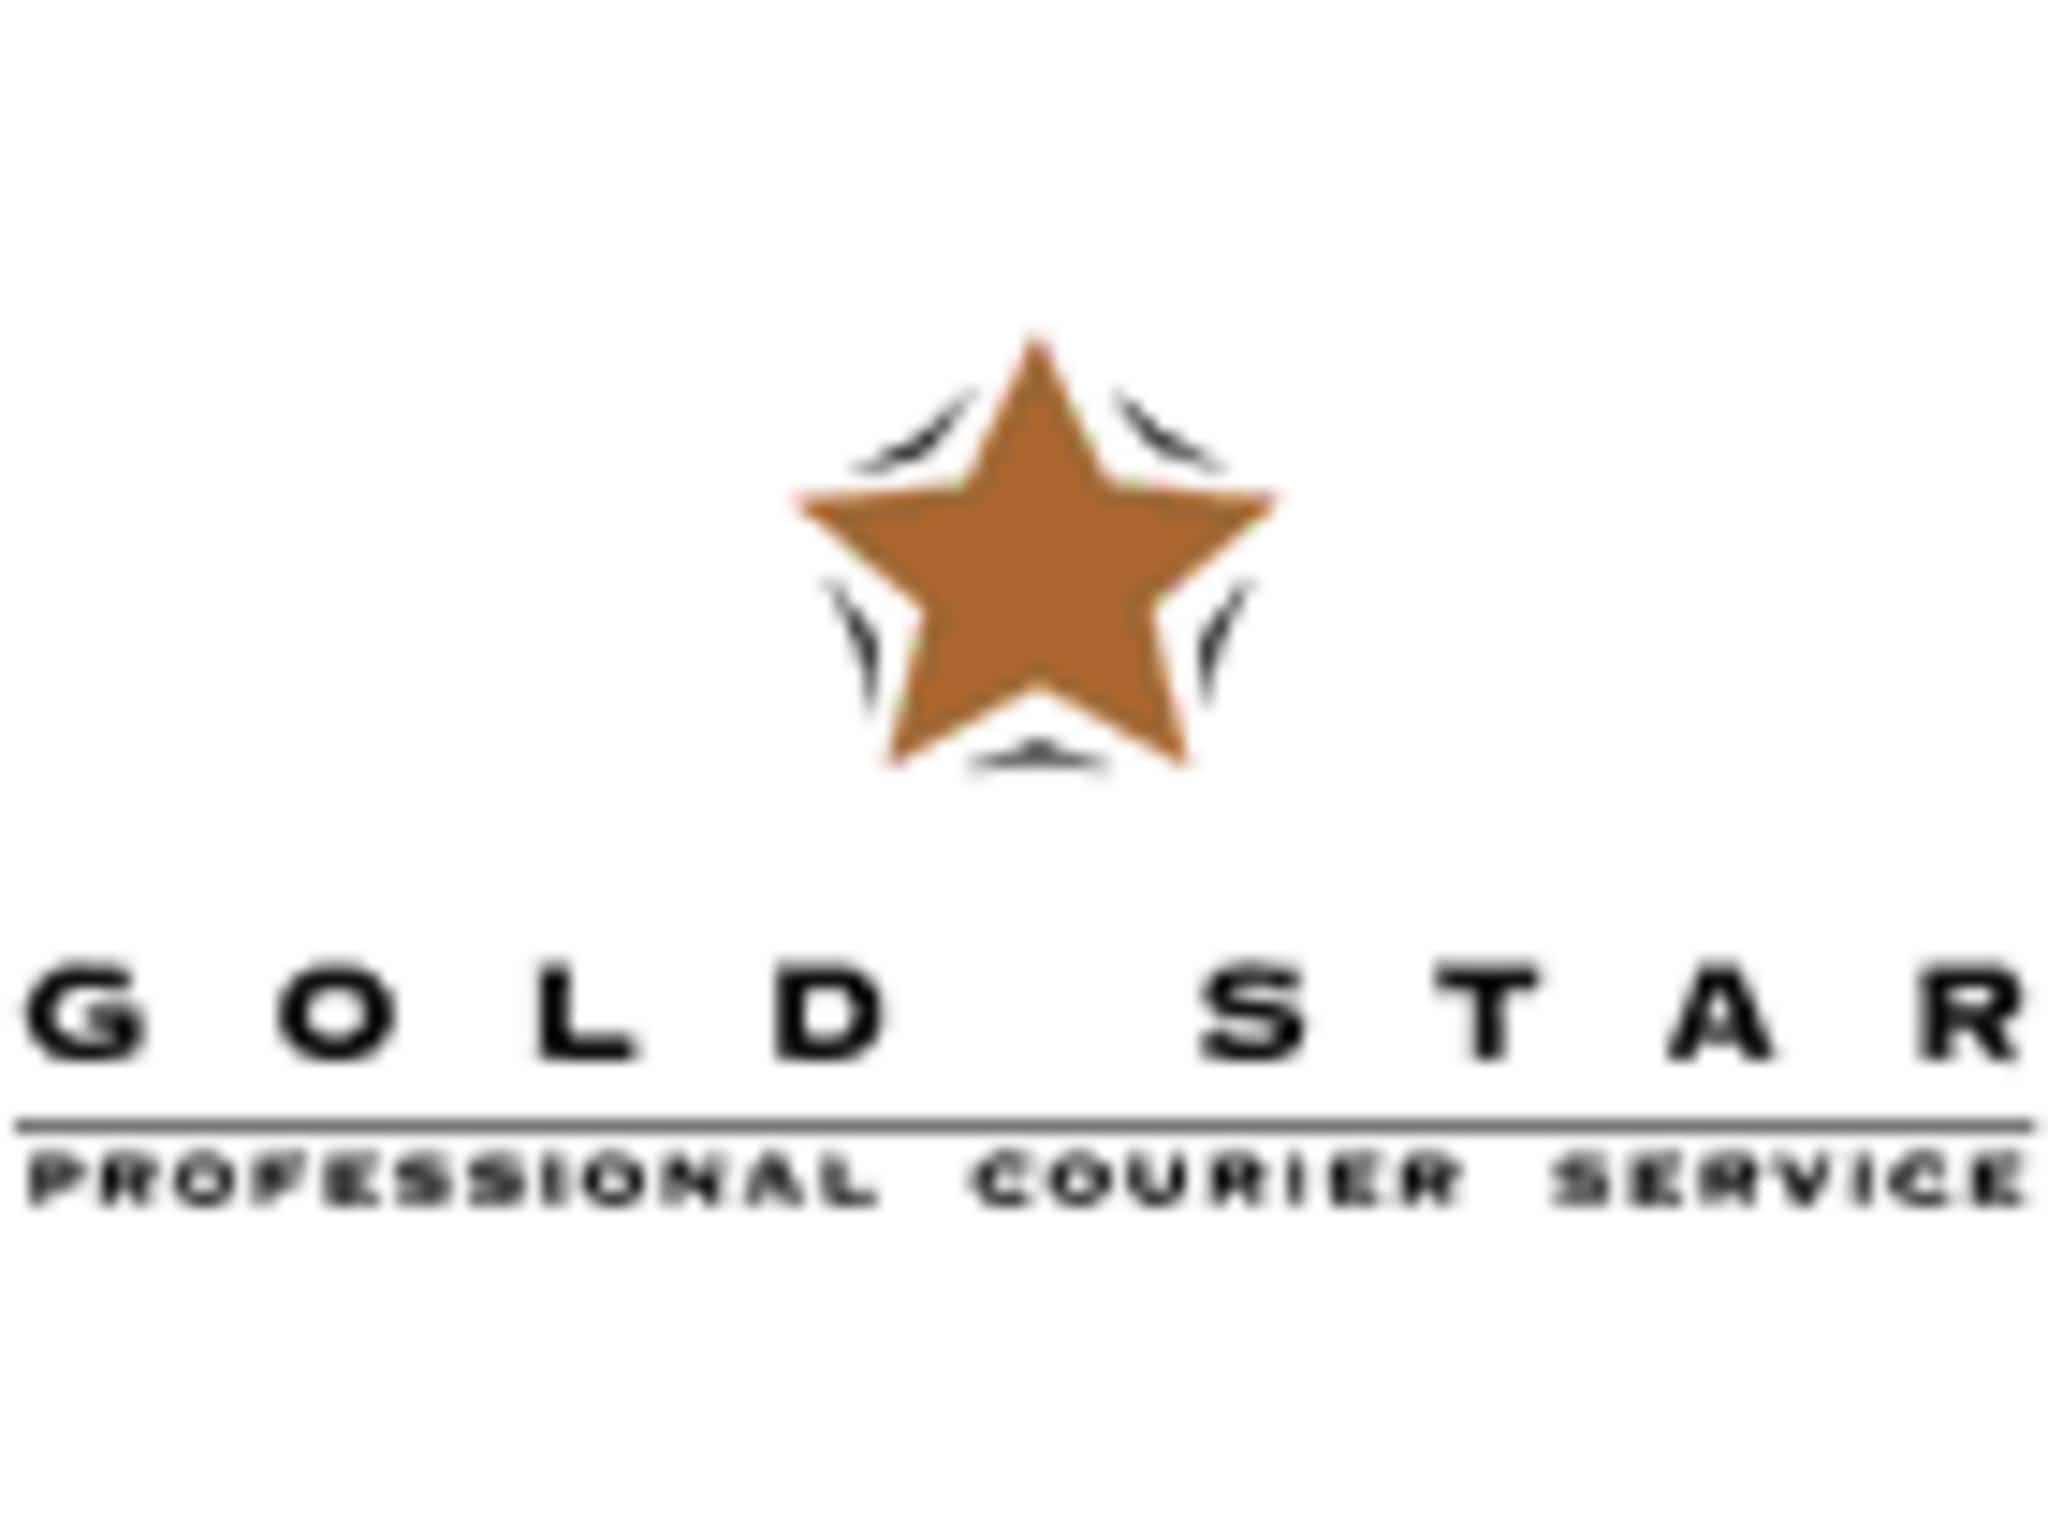 photo Gold Star Professional Courier